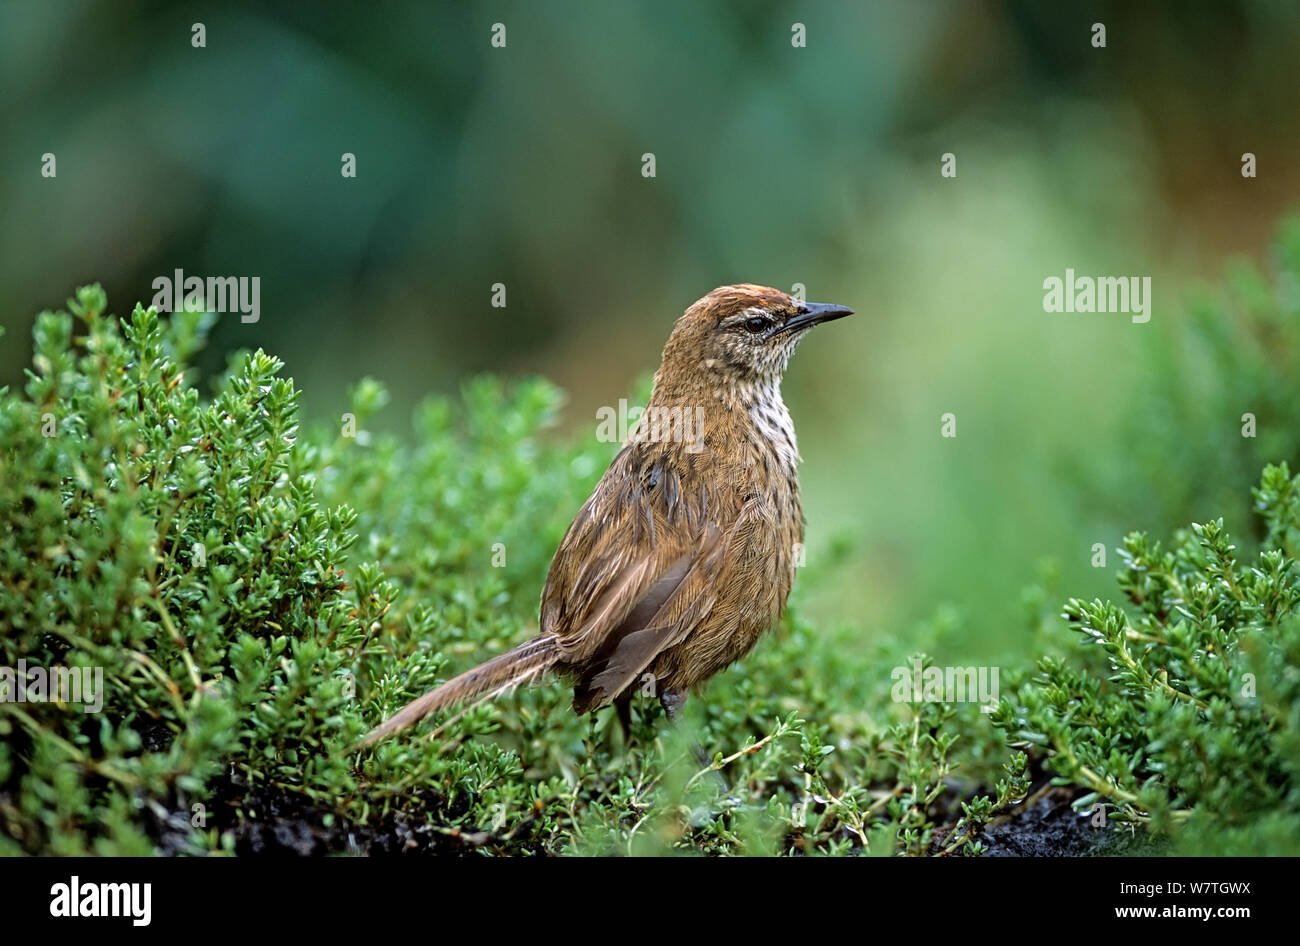 Snares Island Fernbird (Bowdleria punctata caudata) foraging for insects in humid ground vegetation. Stations Point, Snares Island, New Zealand. Stock Photo